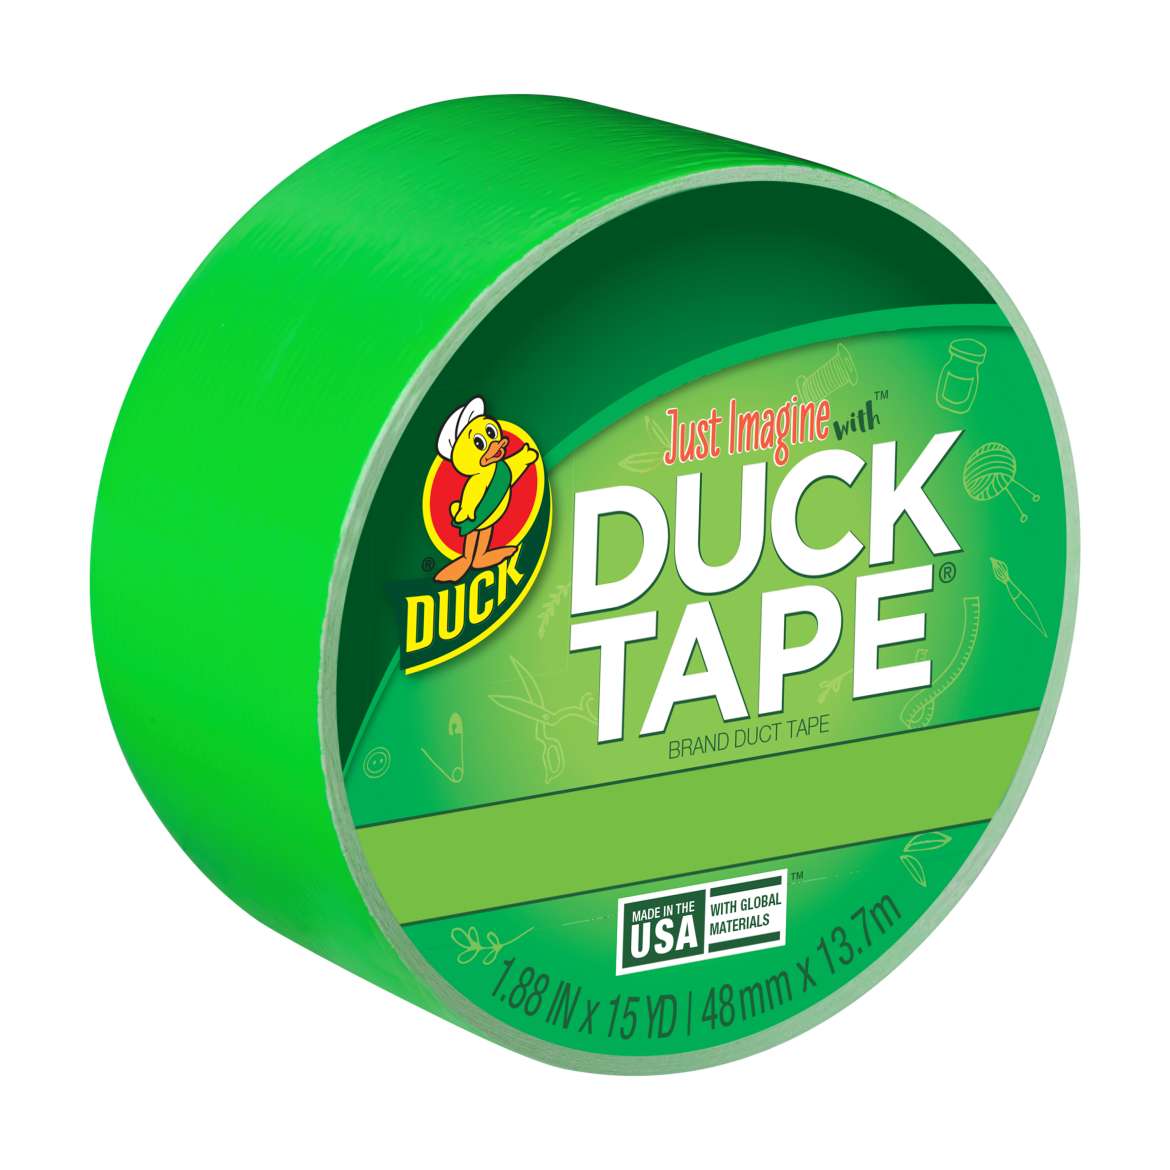 Color Duck Tape® Brand Duct Tape - Lime Green, 1.88 in. x 15 yd.